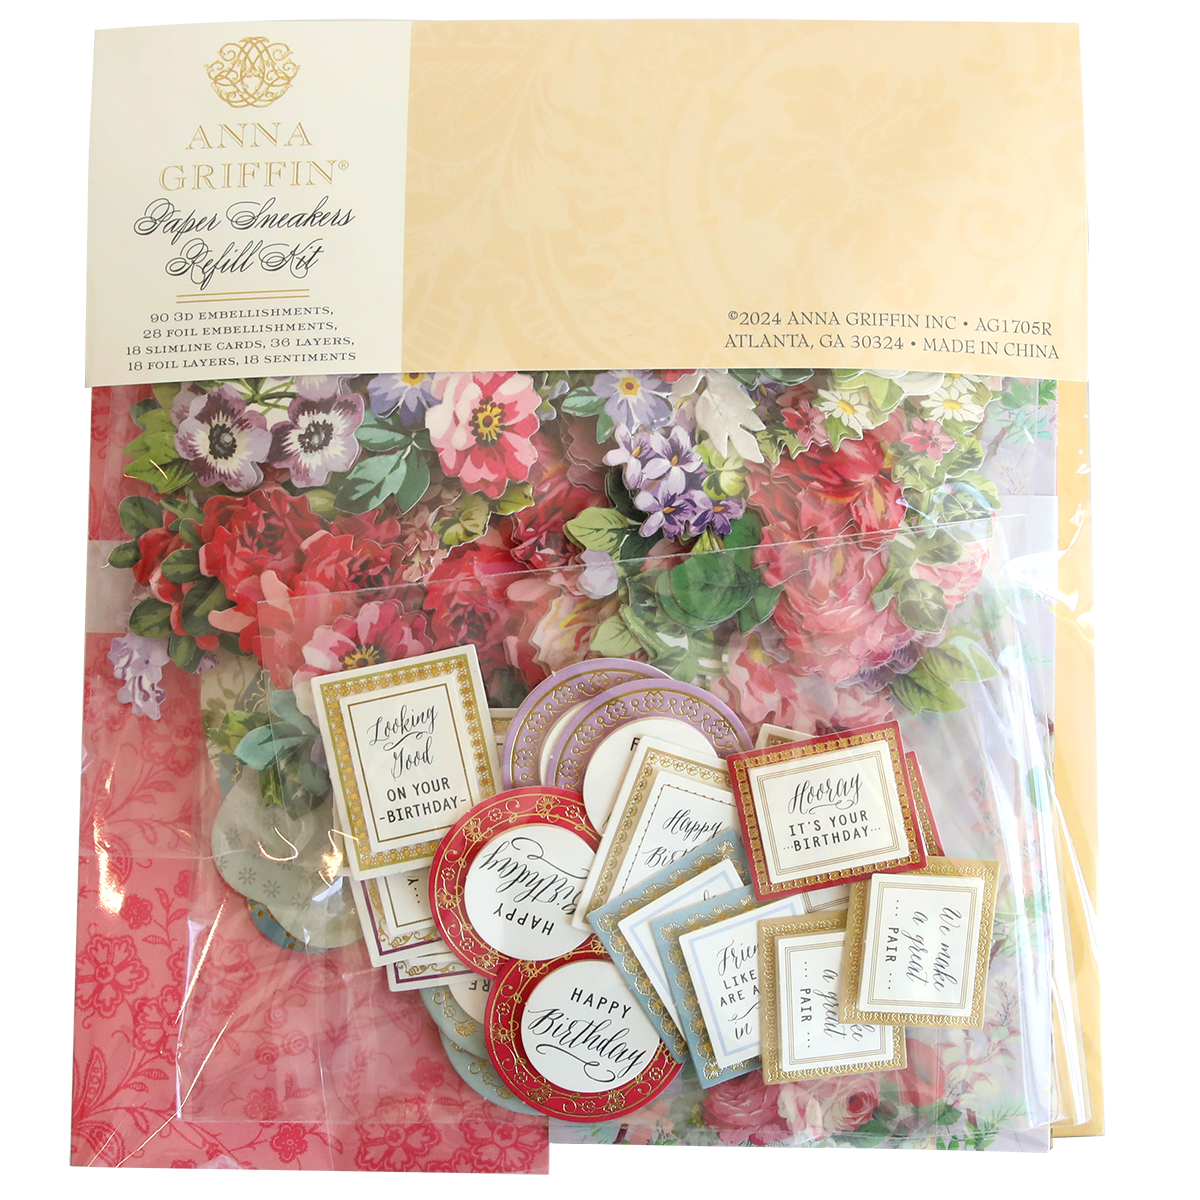 Package of floral and birthday-themed craft embellishments with 3D Sentiments by Paper Sneakers Refill Kit.